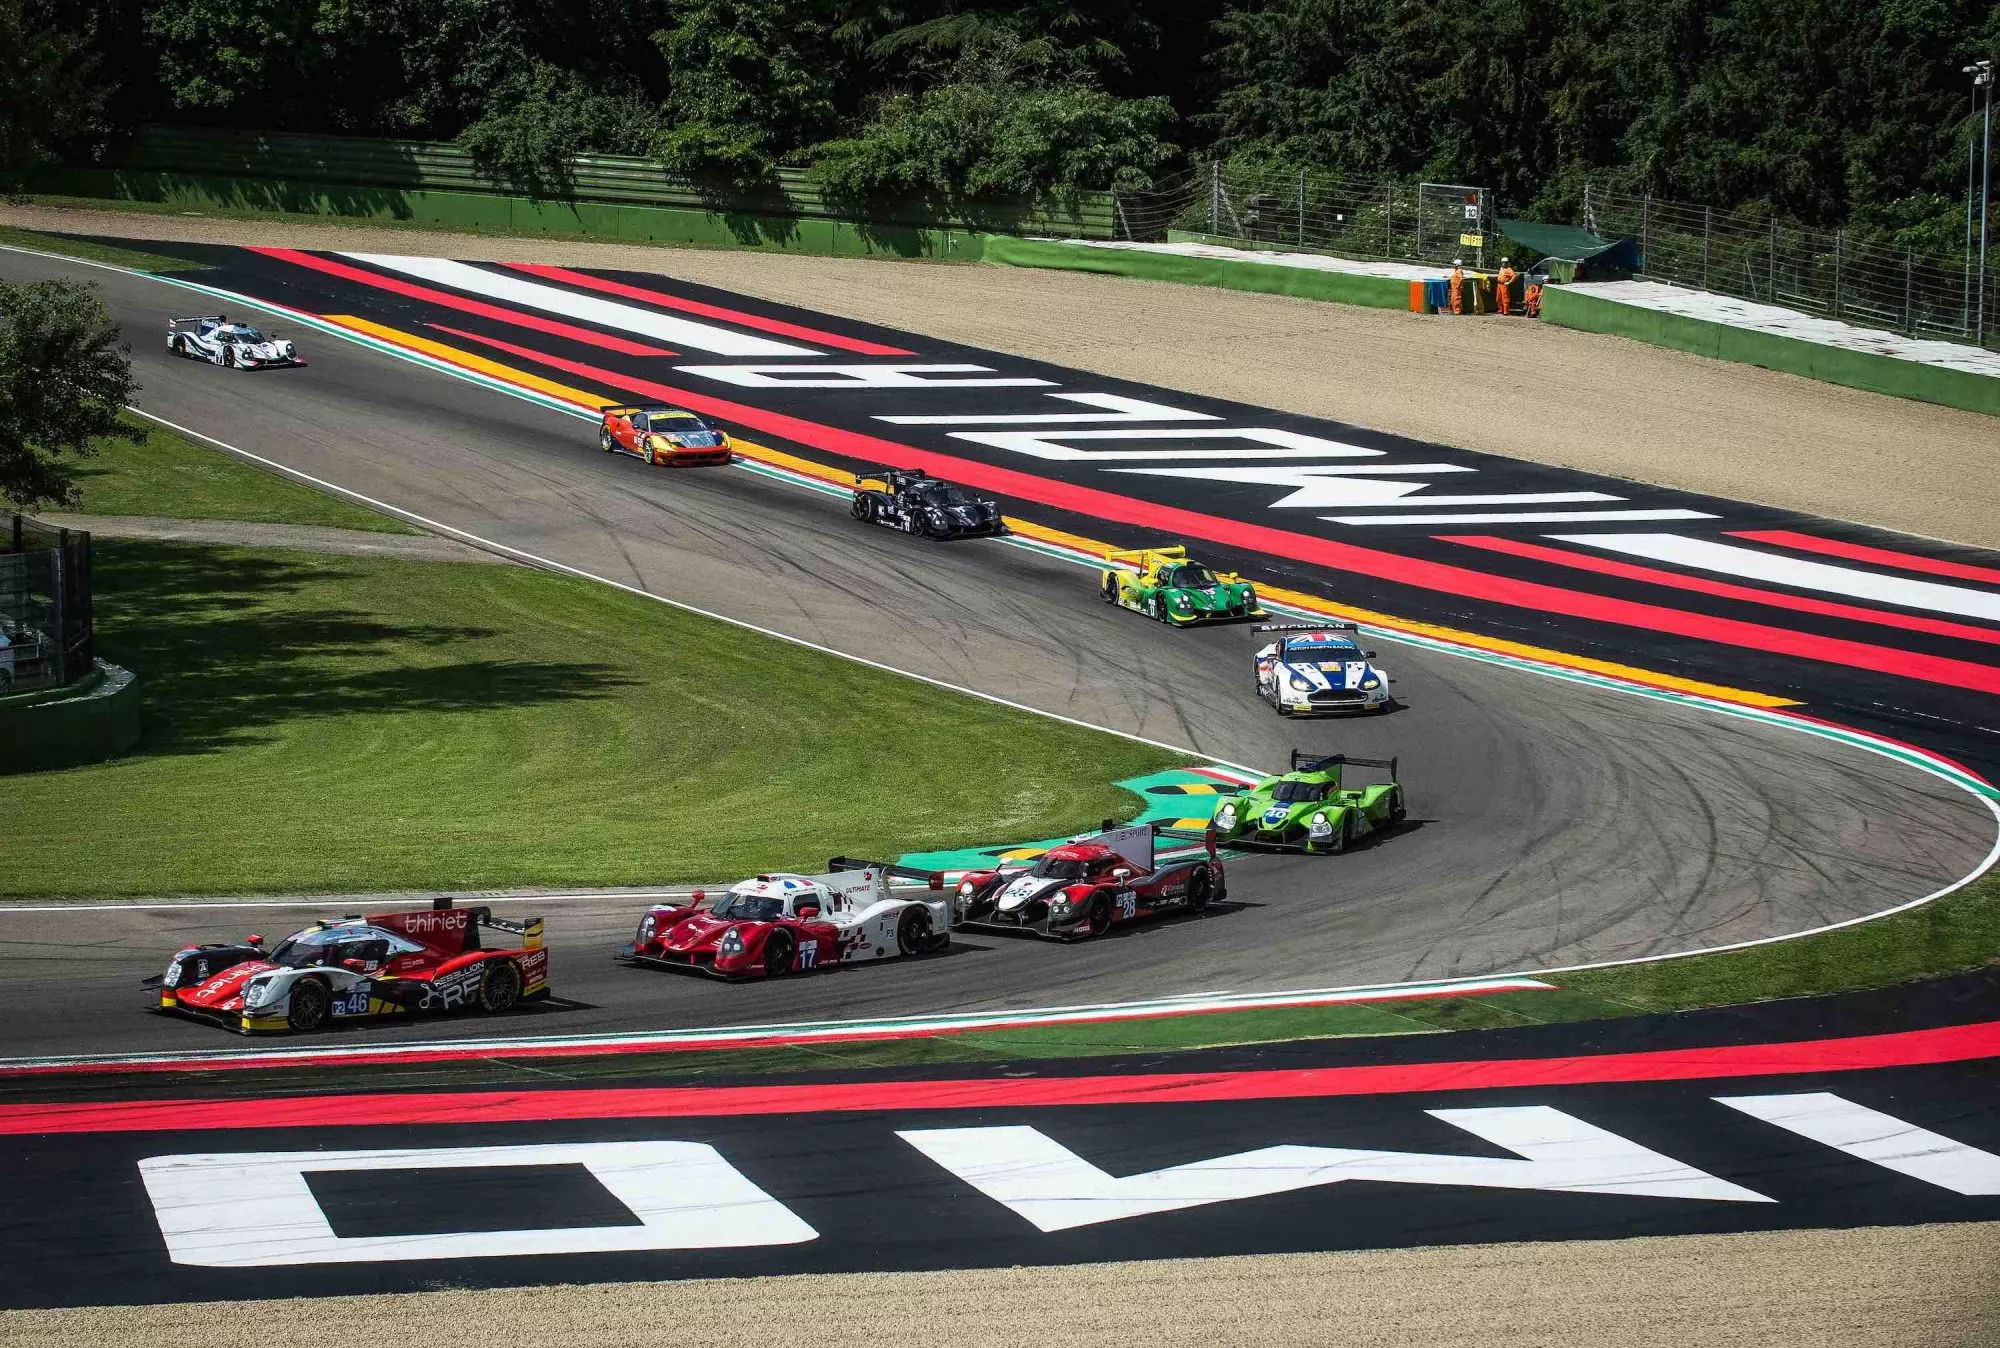 Imola Circuit in Italy, Europe | Racing - Rated 4.7